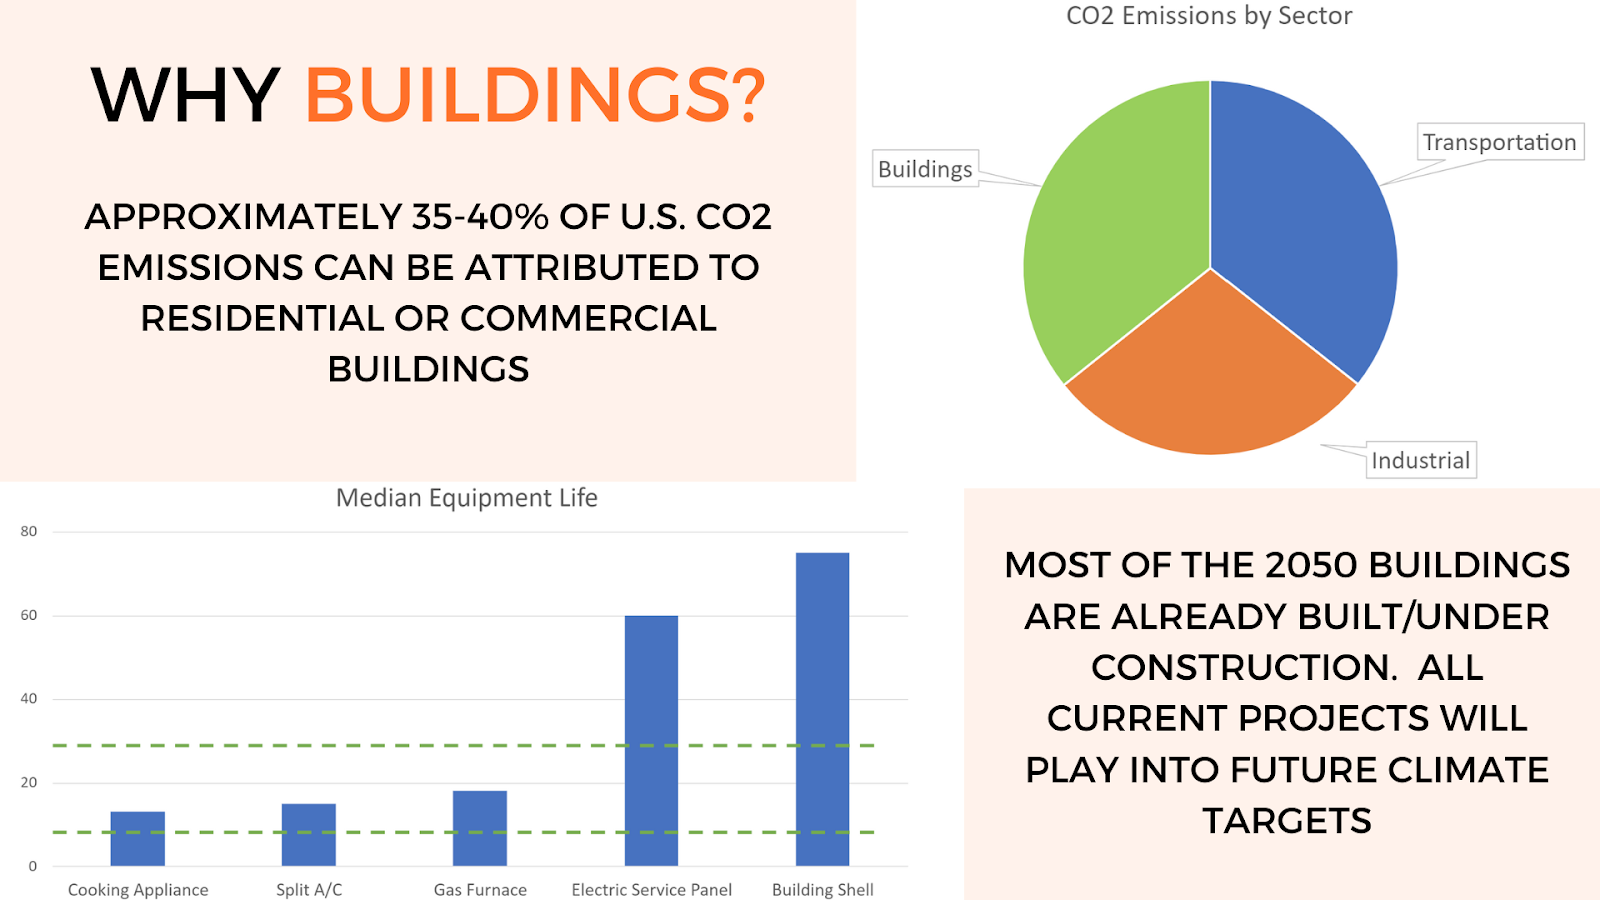 Charts showing 35-40% of U.S. CO2 emissions can be attributed to residential or commercial buildings; most of the 2050 buildings are already built/under construction. All current projects will play into future climate targets. 